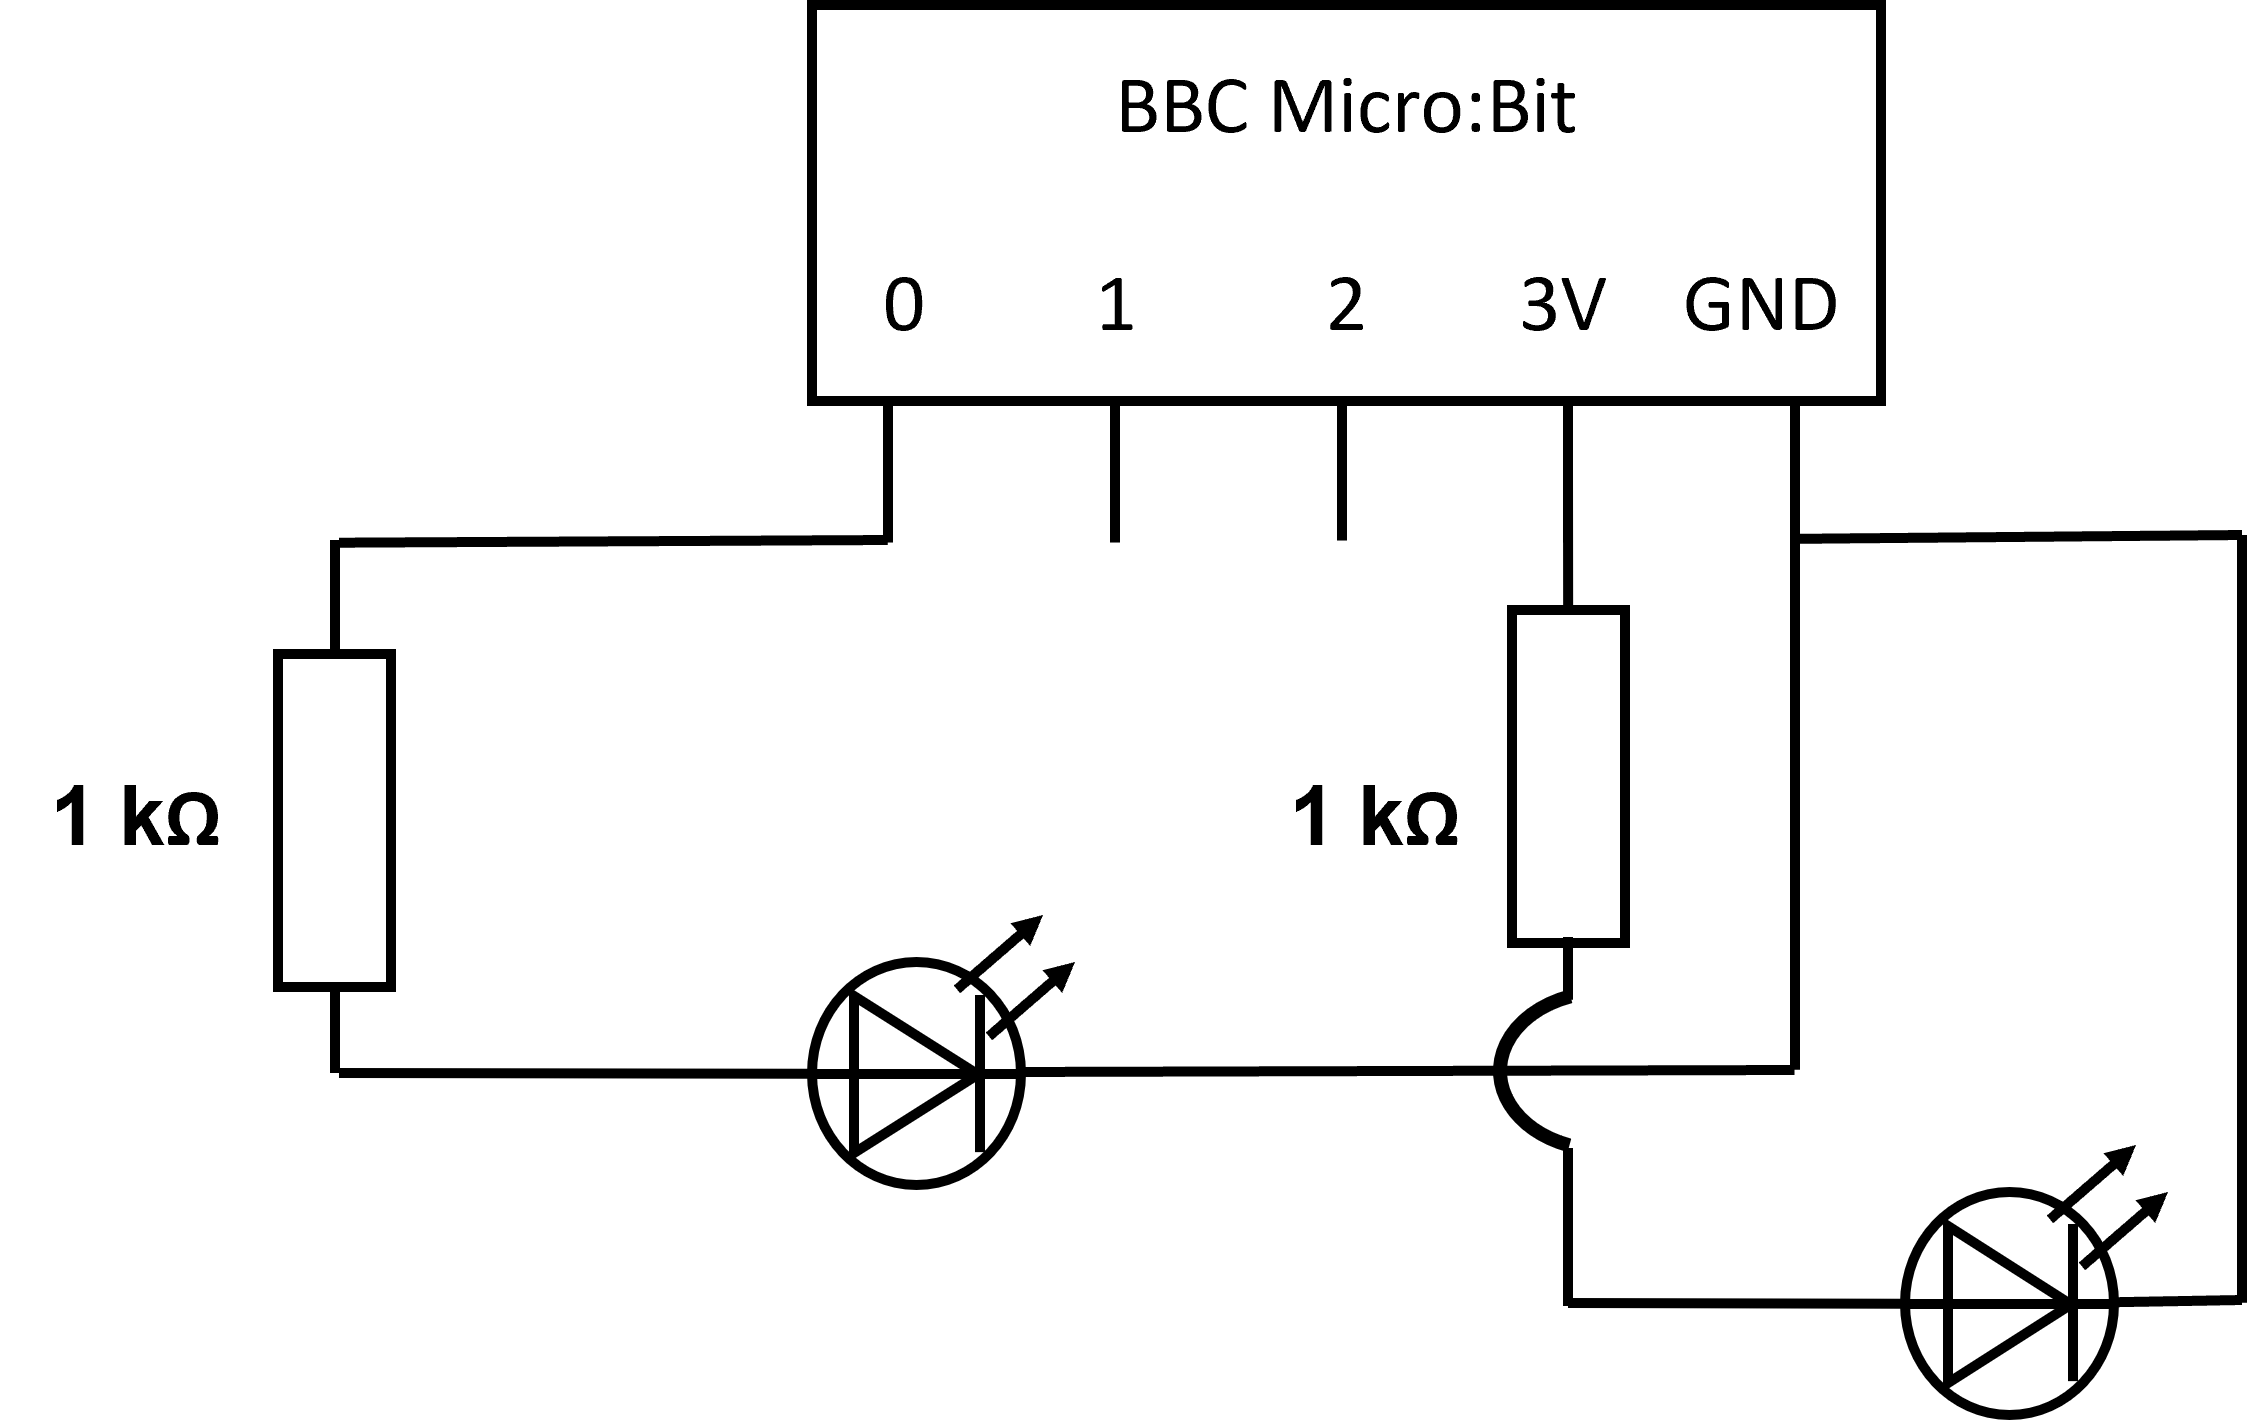 A circuit with two sets containing an LED and 1kΩ resistor each. One set is connected to the GND and 3V pins of the Micro:Bit. The other to the GND and 0 pins.